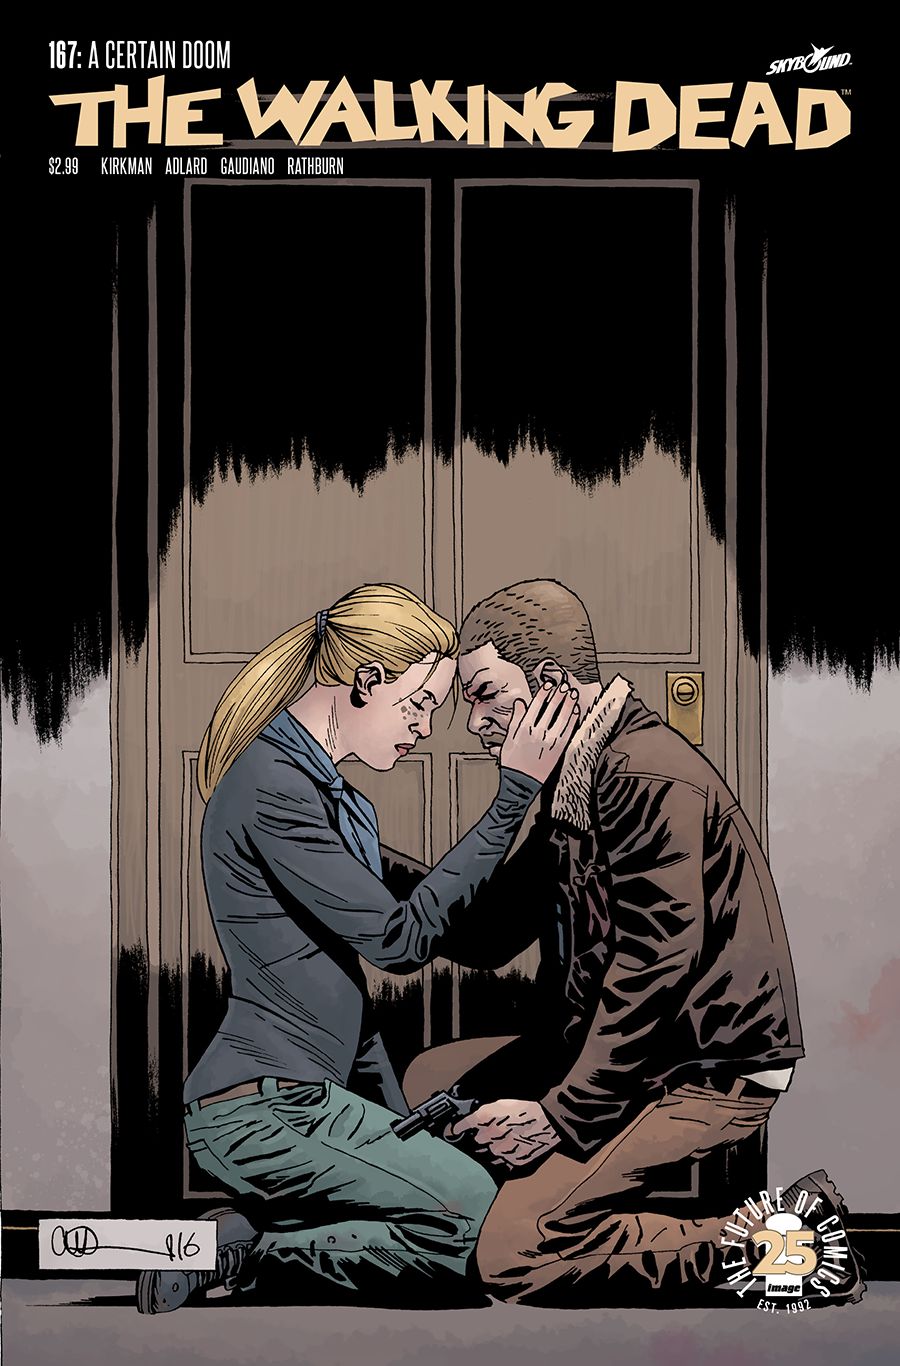 The Walking Dead Issue 167 A Certain Doom Cover Is Worrisome